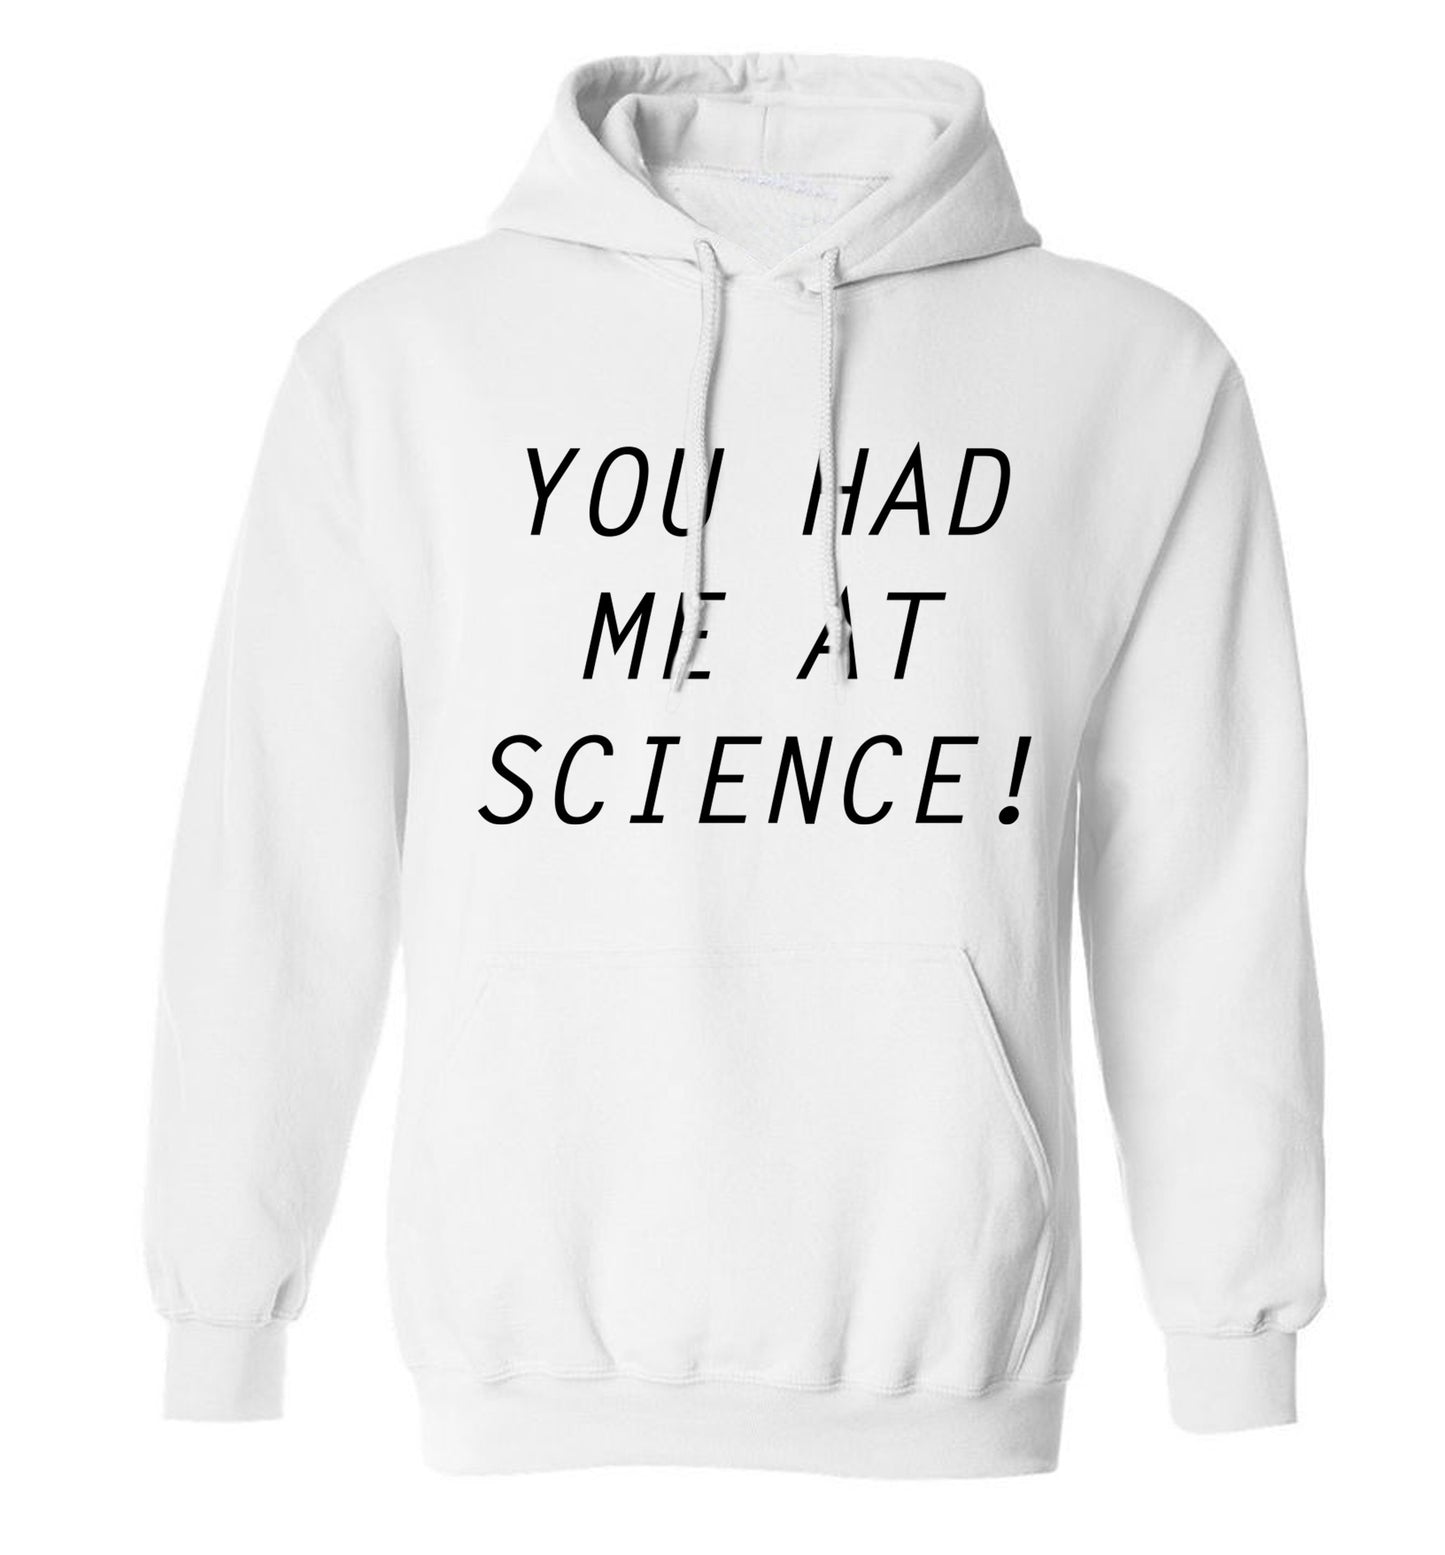 You had me at science adults unisex white hoodie 2XL